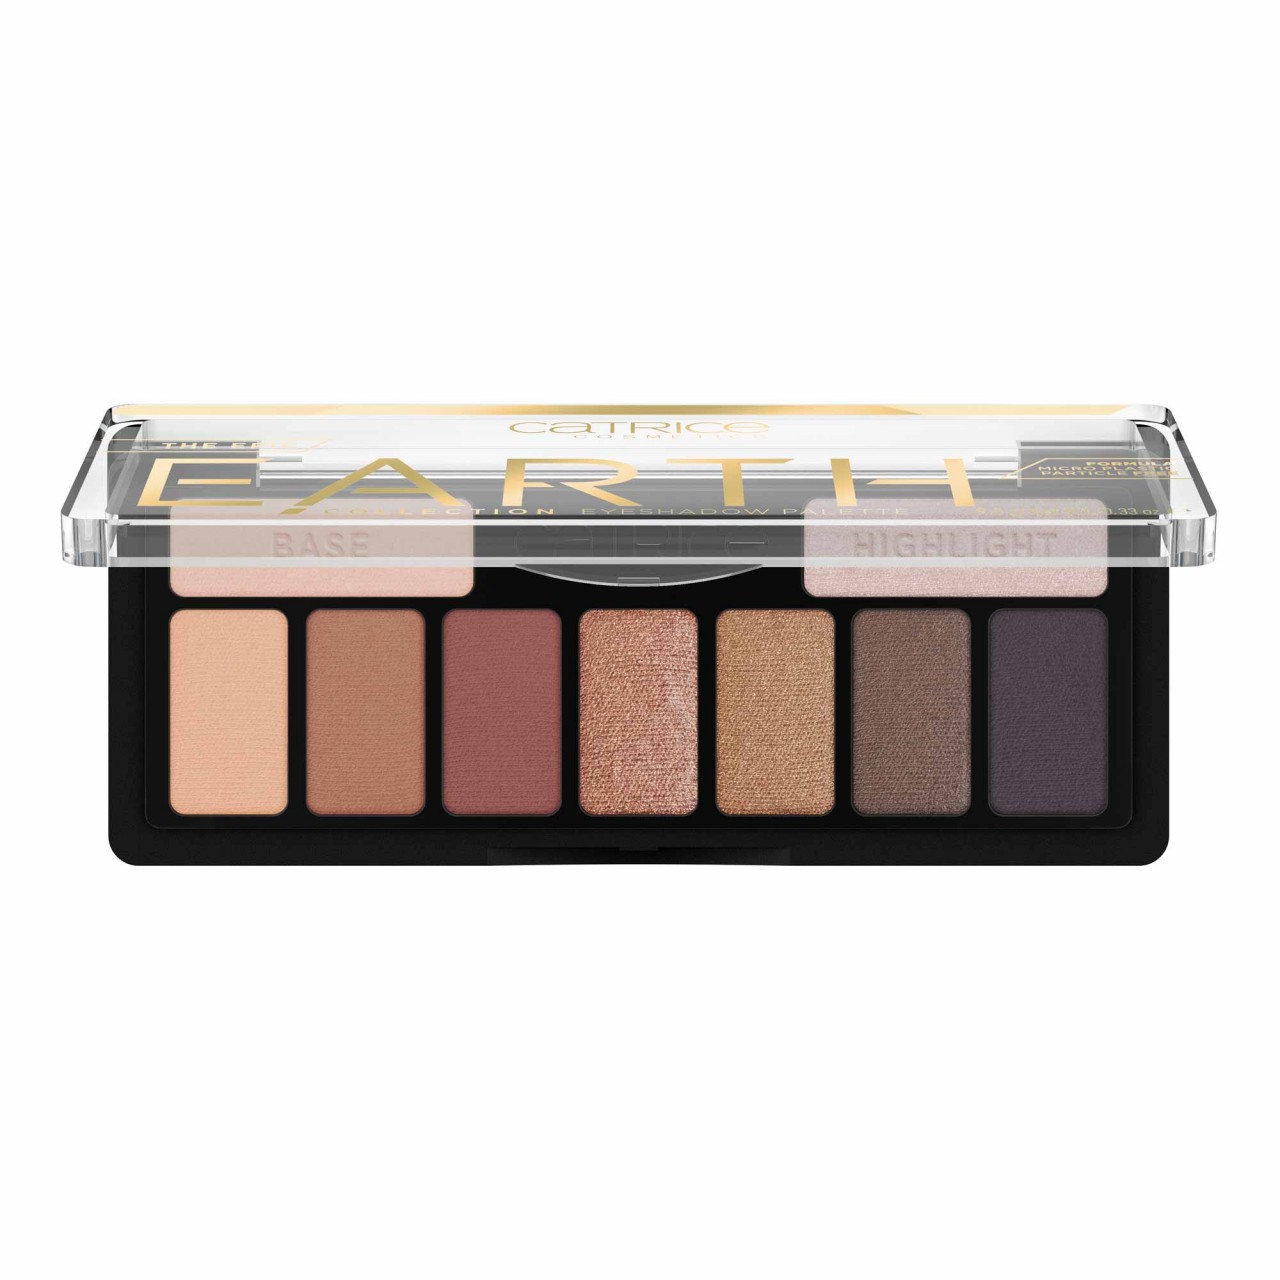 CATRICE - Eyeshadow Epic Earth Collection Palette - 